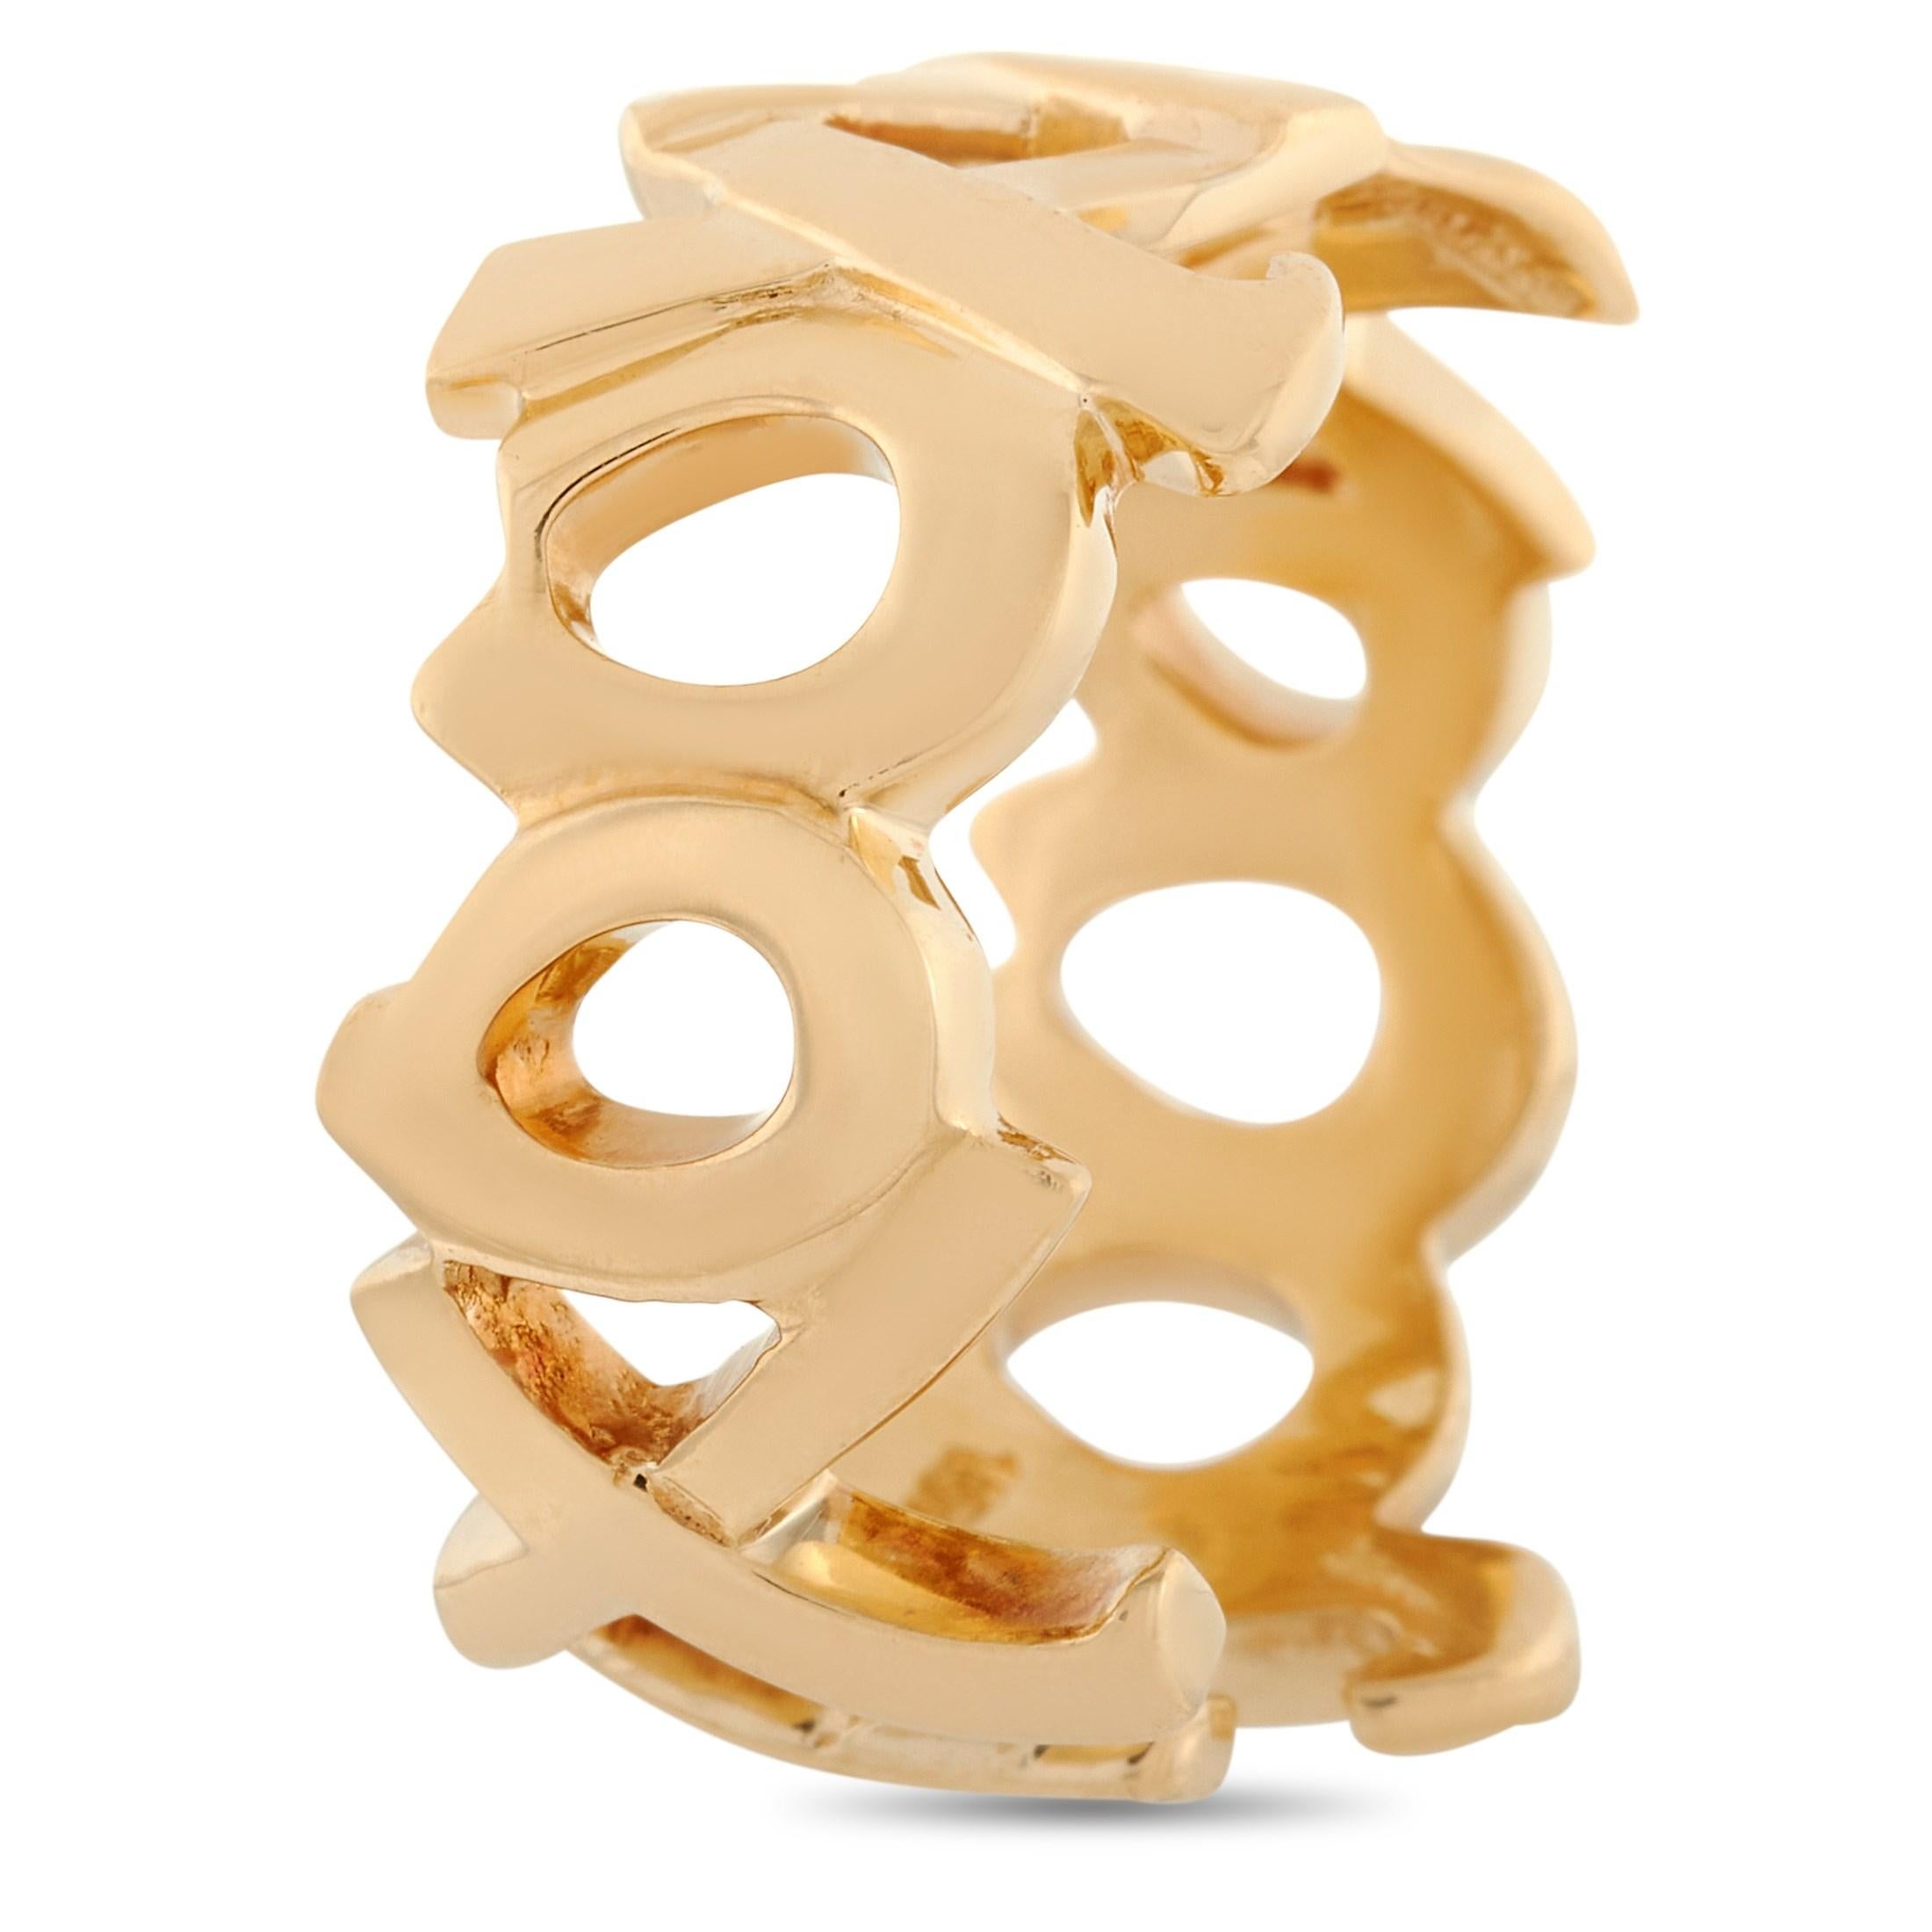 This Tiffany & Co ring is made from 18K yellow gold and features playful X’s and O’s. The exquisite piece of jewelry belongs to the Paloma Picasso Graffiti Love and Kisses collaboration collection. The ring weighs 7.6 grams and the top measures